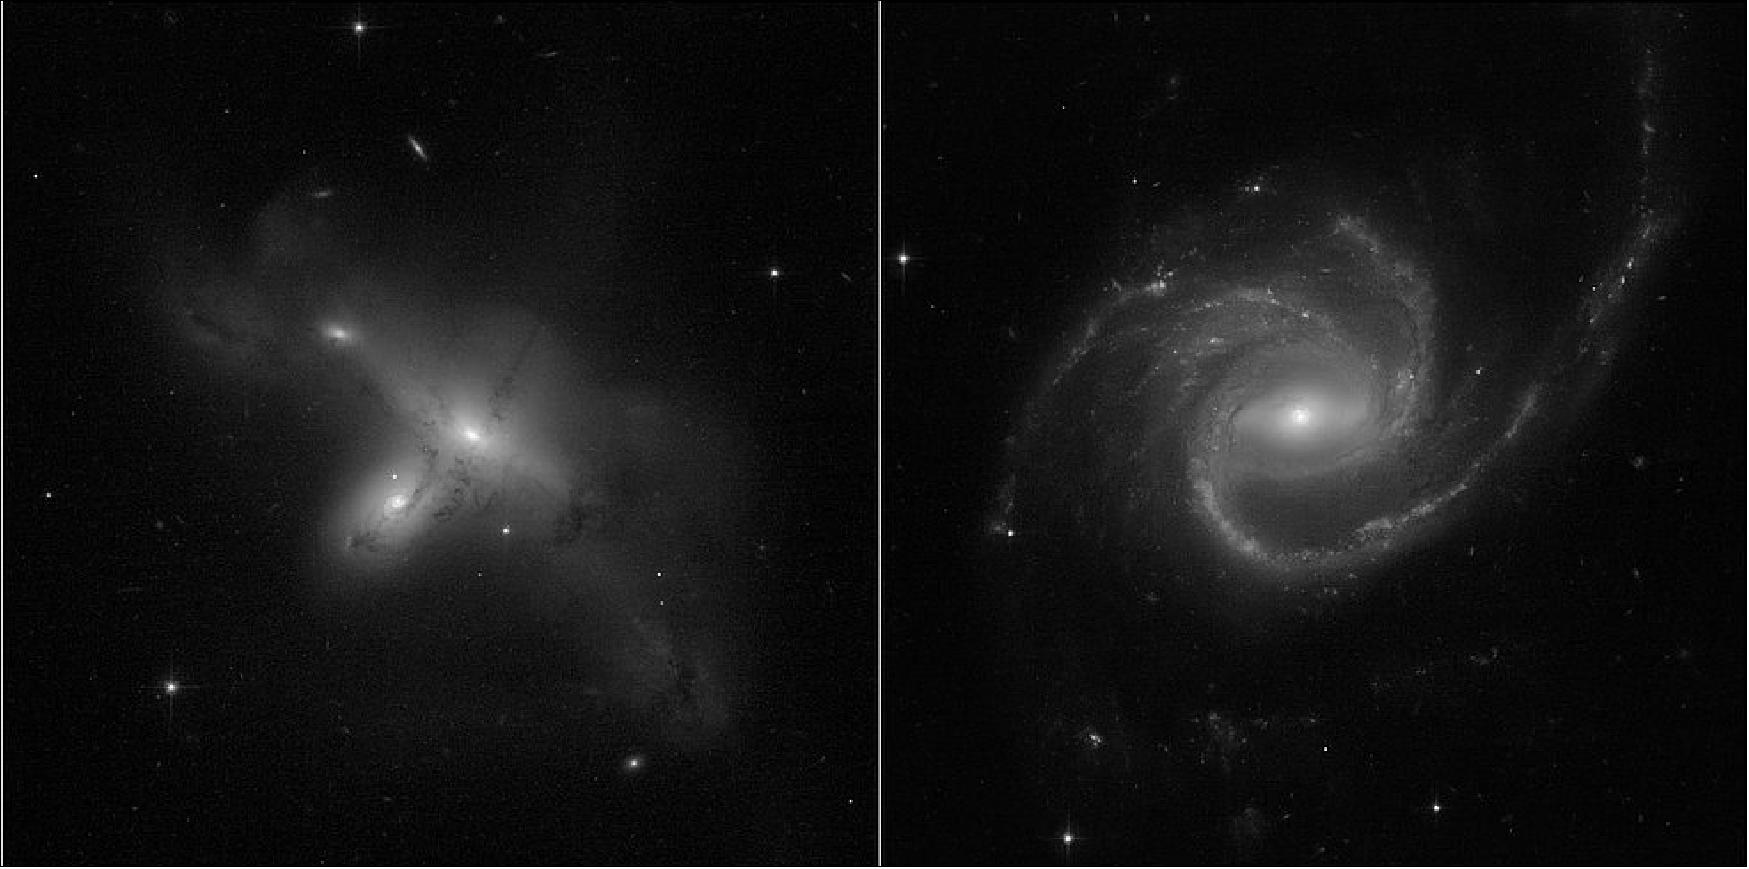 Figure 66: These images, from a program led by Julianne Dalcanton of the University of Washington in Seattle, demonstrate Hubble's return to full science operations. Left: ARP-MADORE2115-273 is a rarely observed example of a pair of interacting galaxies in the southern hemisphere. Right: ARP-MADORE0002-503 is a large spiral galaxy with unusual, extended spiral arms. While most disk galaxies have an even number of spiral arms, this one has three [image credits: Science: NASA, ESA, STScI, Julianne Dalcanton (UW) Image processing: Alyssa Pagan (STScI)]